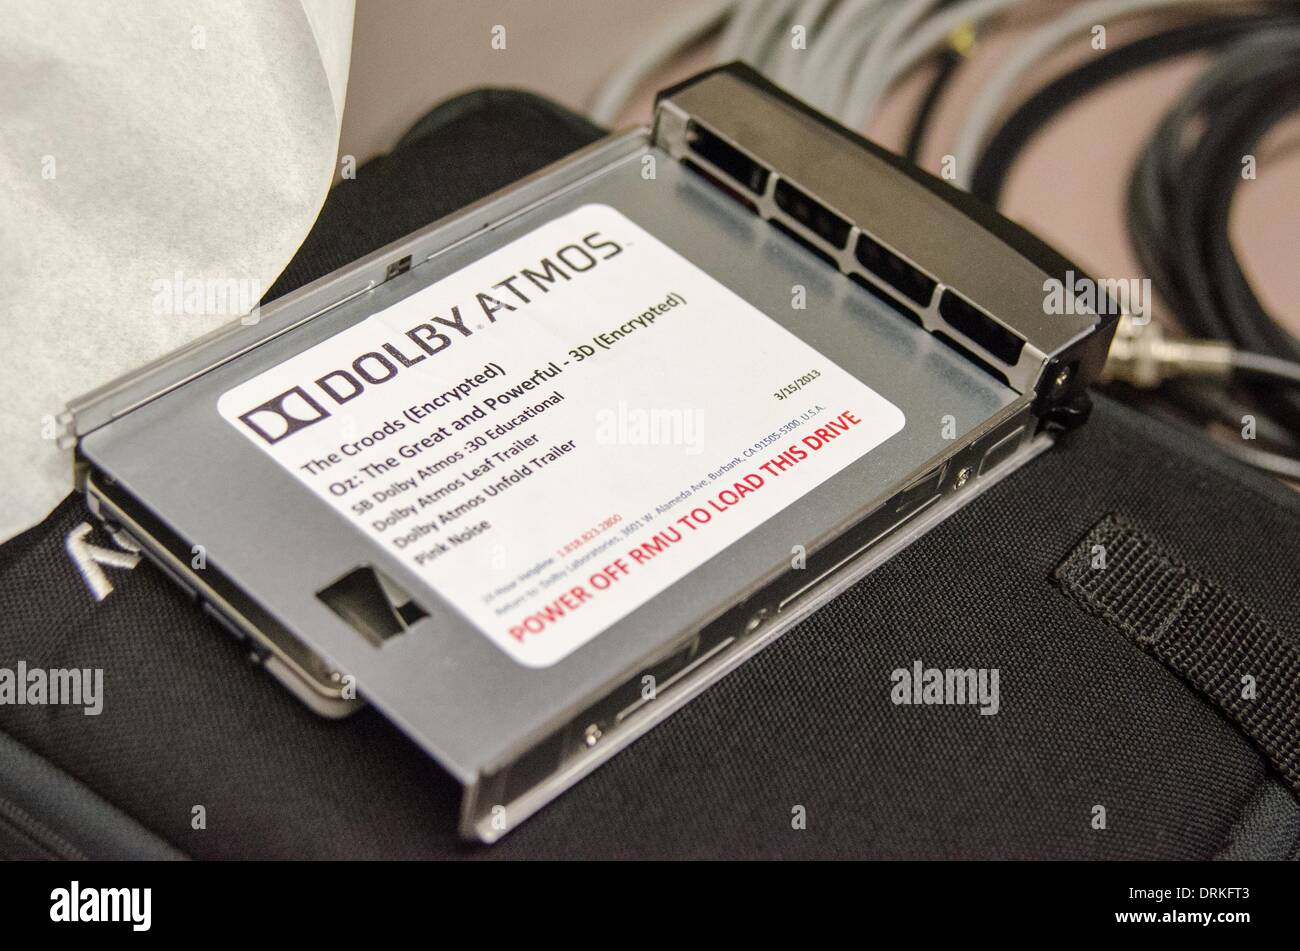 At company headquarters in San Francisco, a hard drive with Dolby Atmos  movie clips has been put aside by engineers working on the new surround  sound technology. - 2013 Stock Photo - Alamy